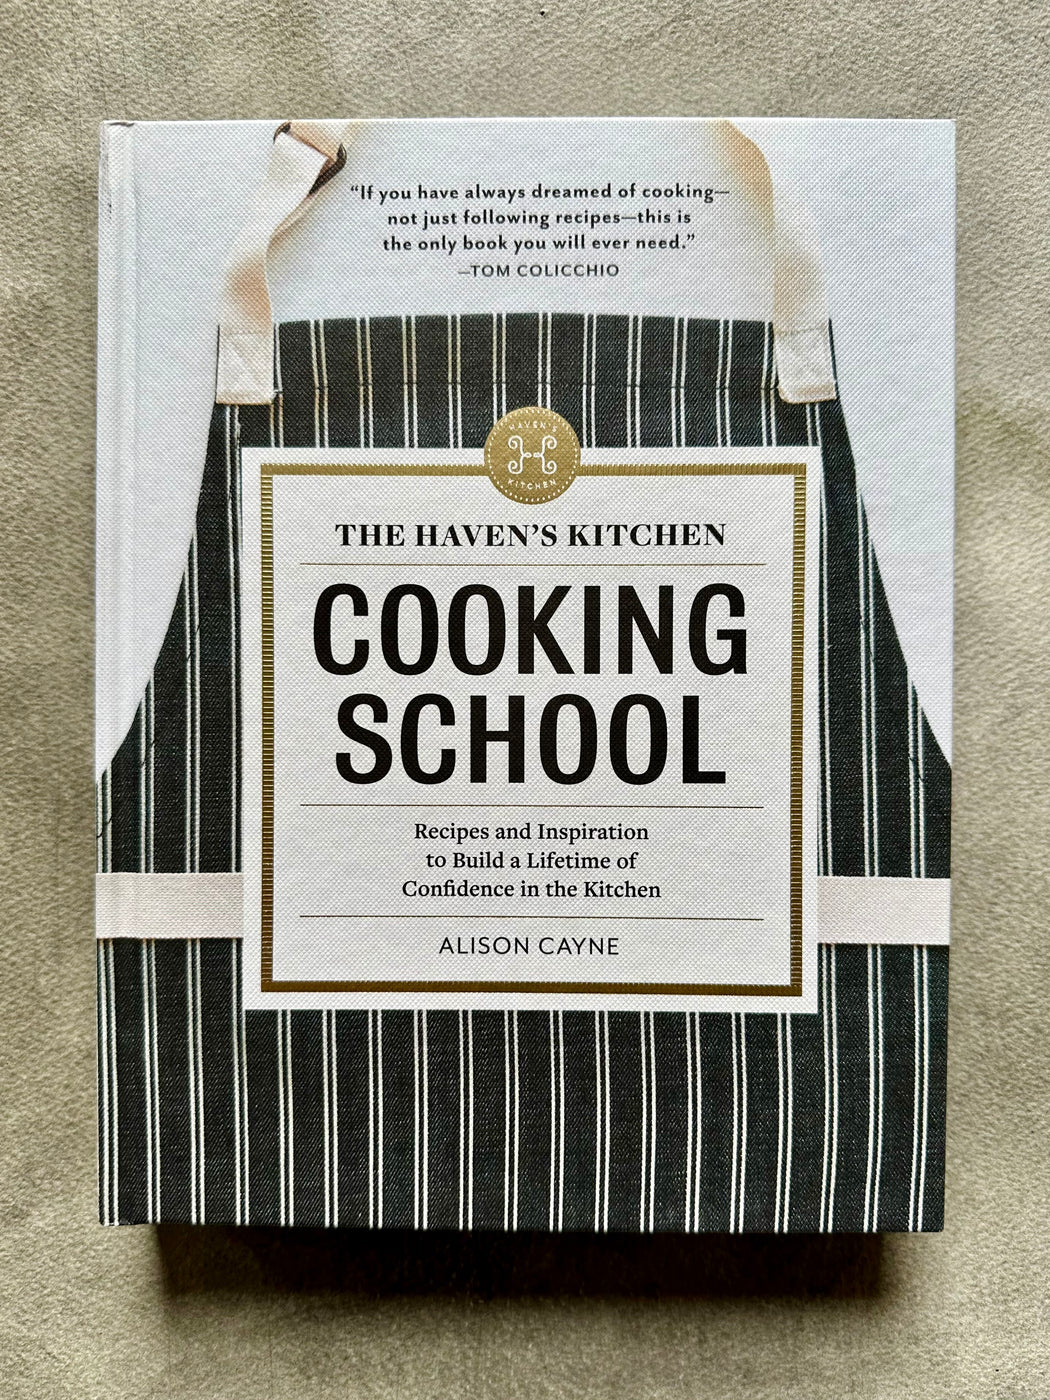 "The Haven's Kitchen Cooking School" by Alison Cayne